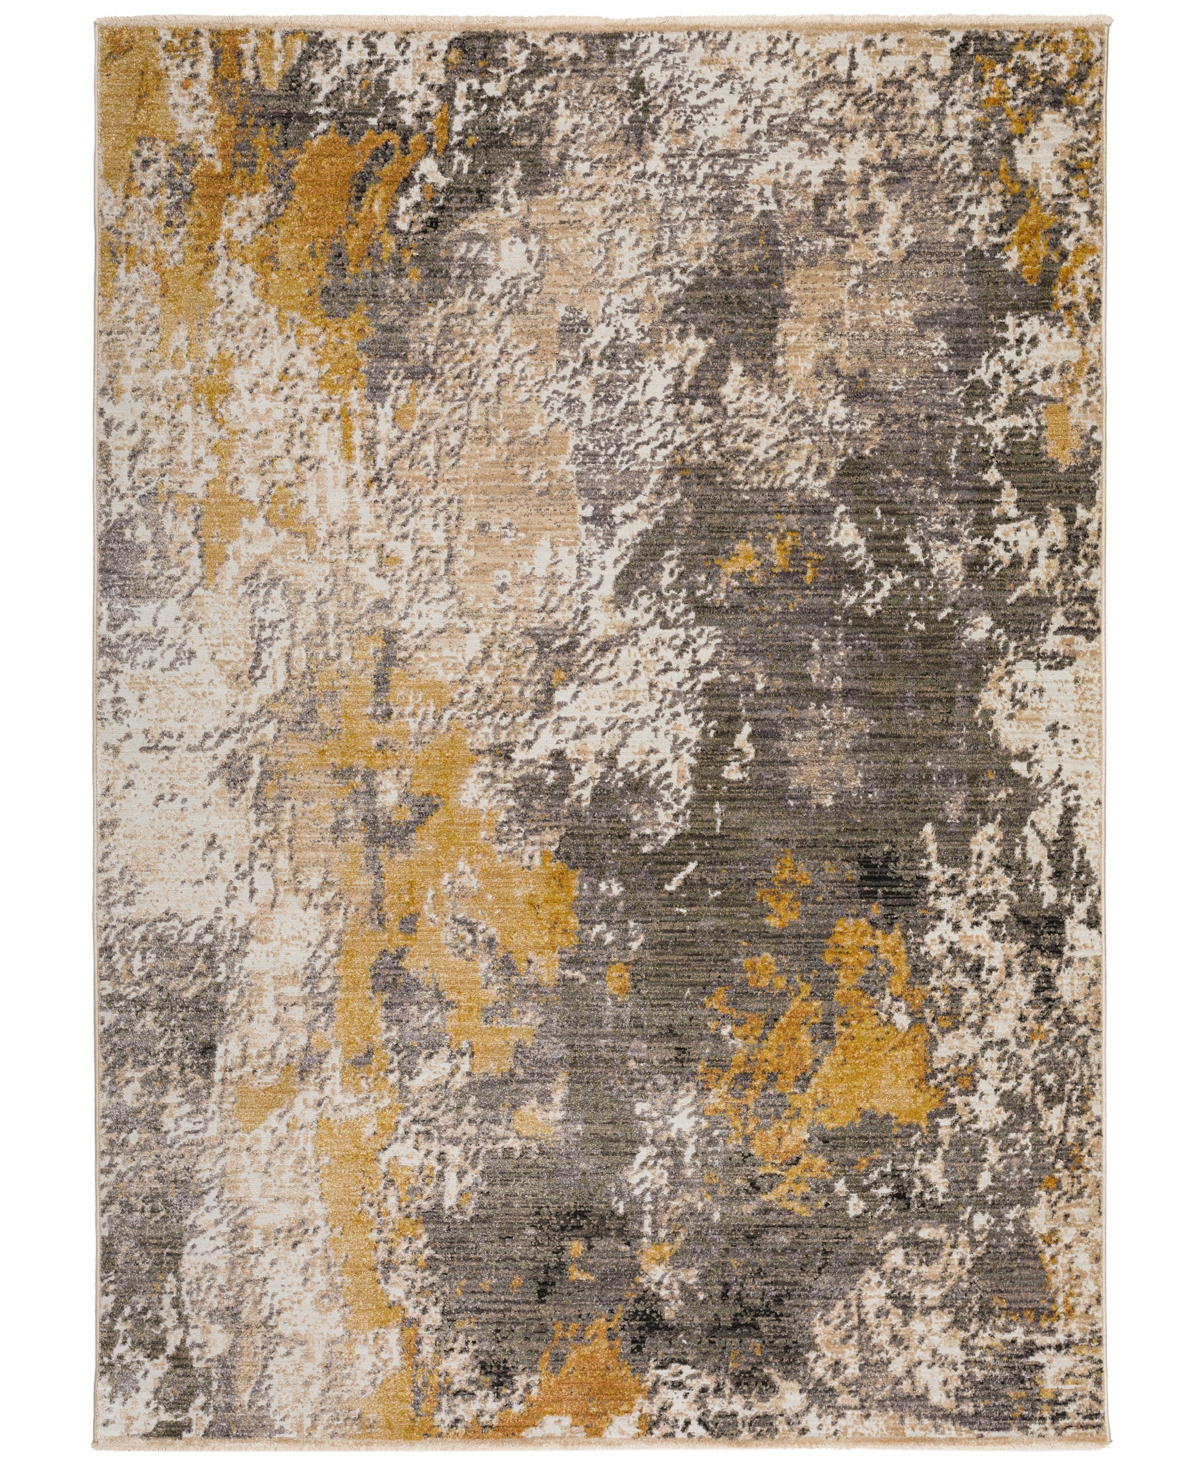 D Style Sergey Sgy9 9' X 12'6" Area Rug In Beige